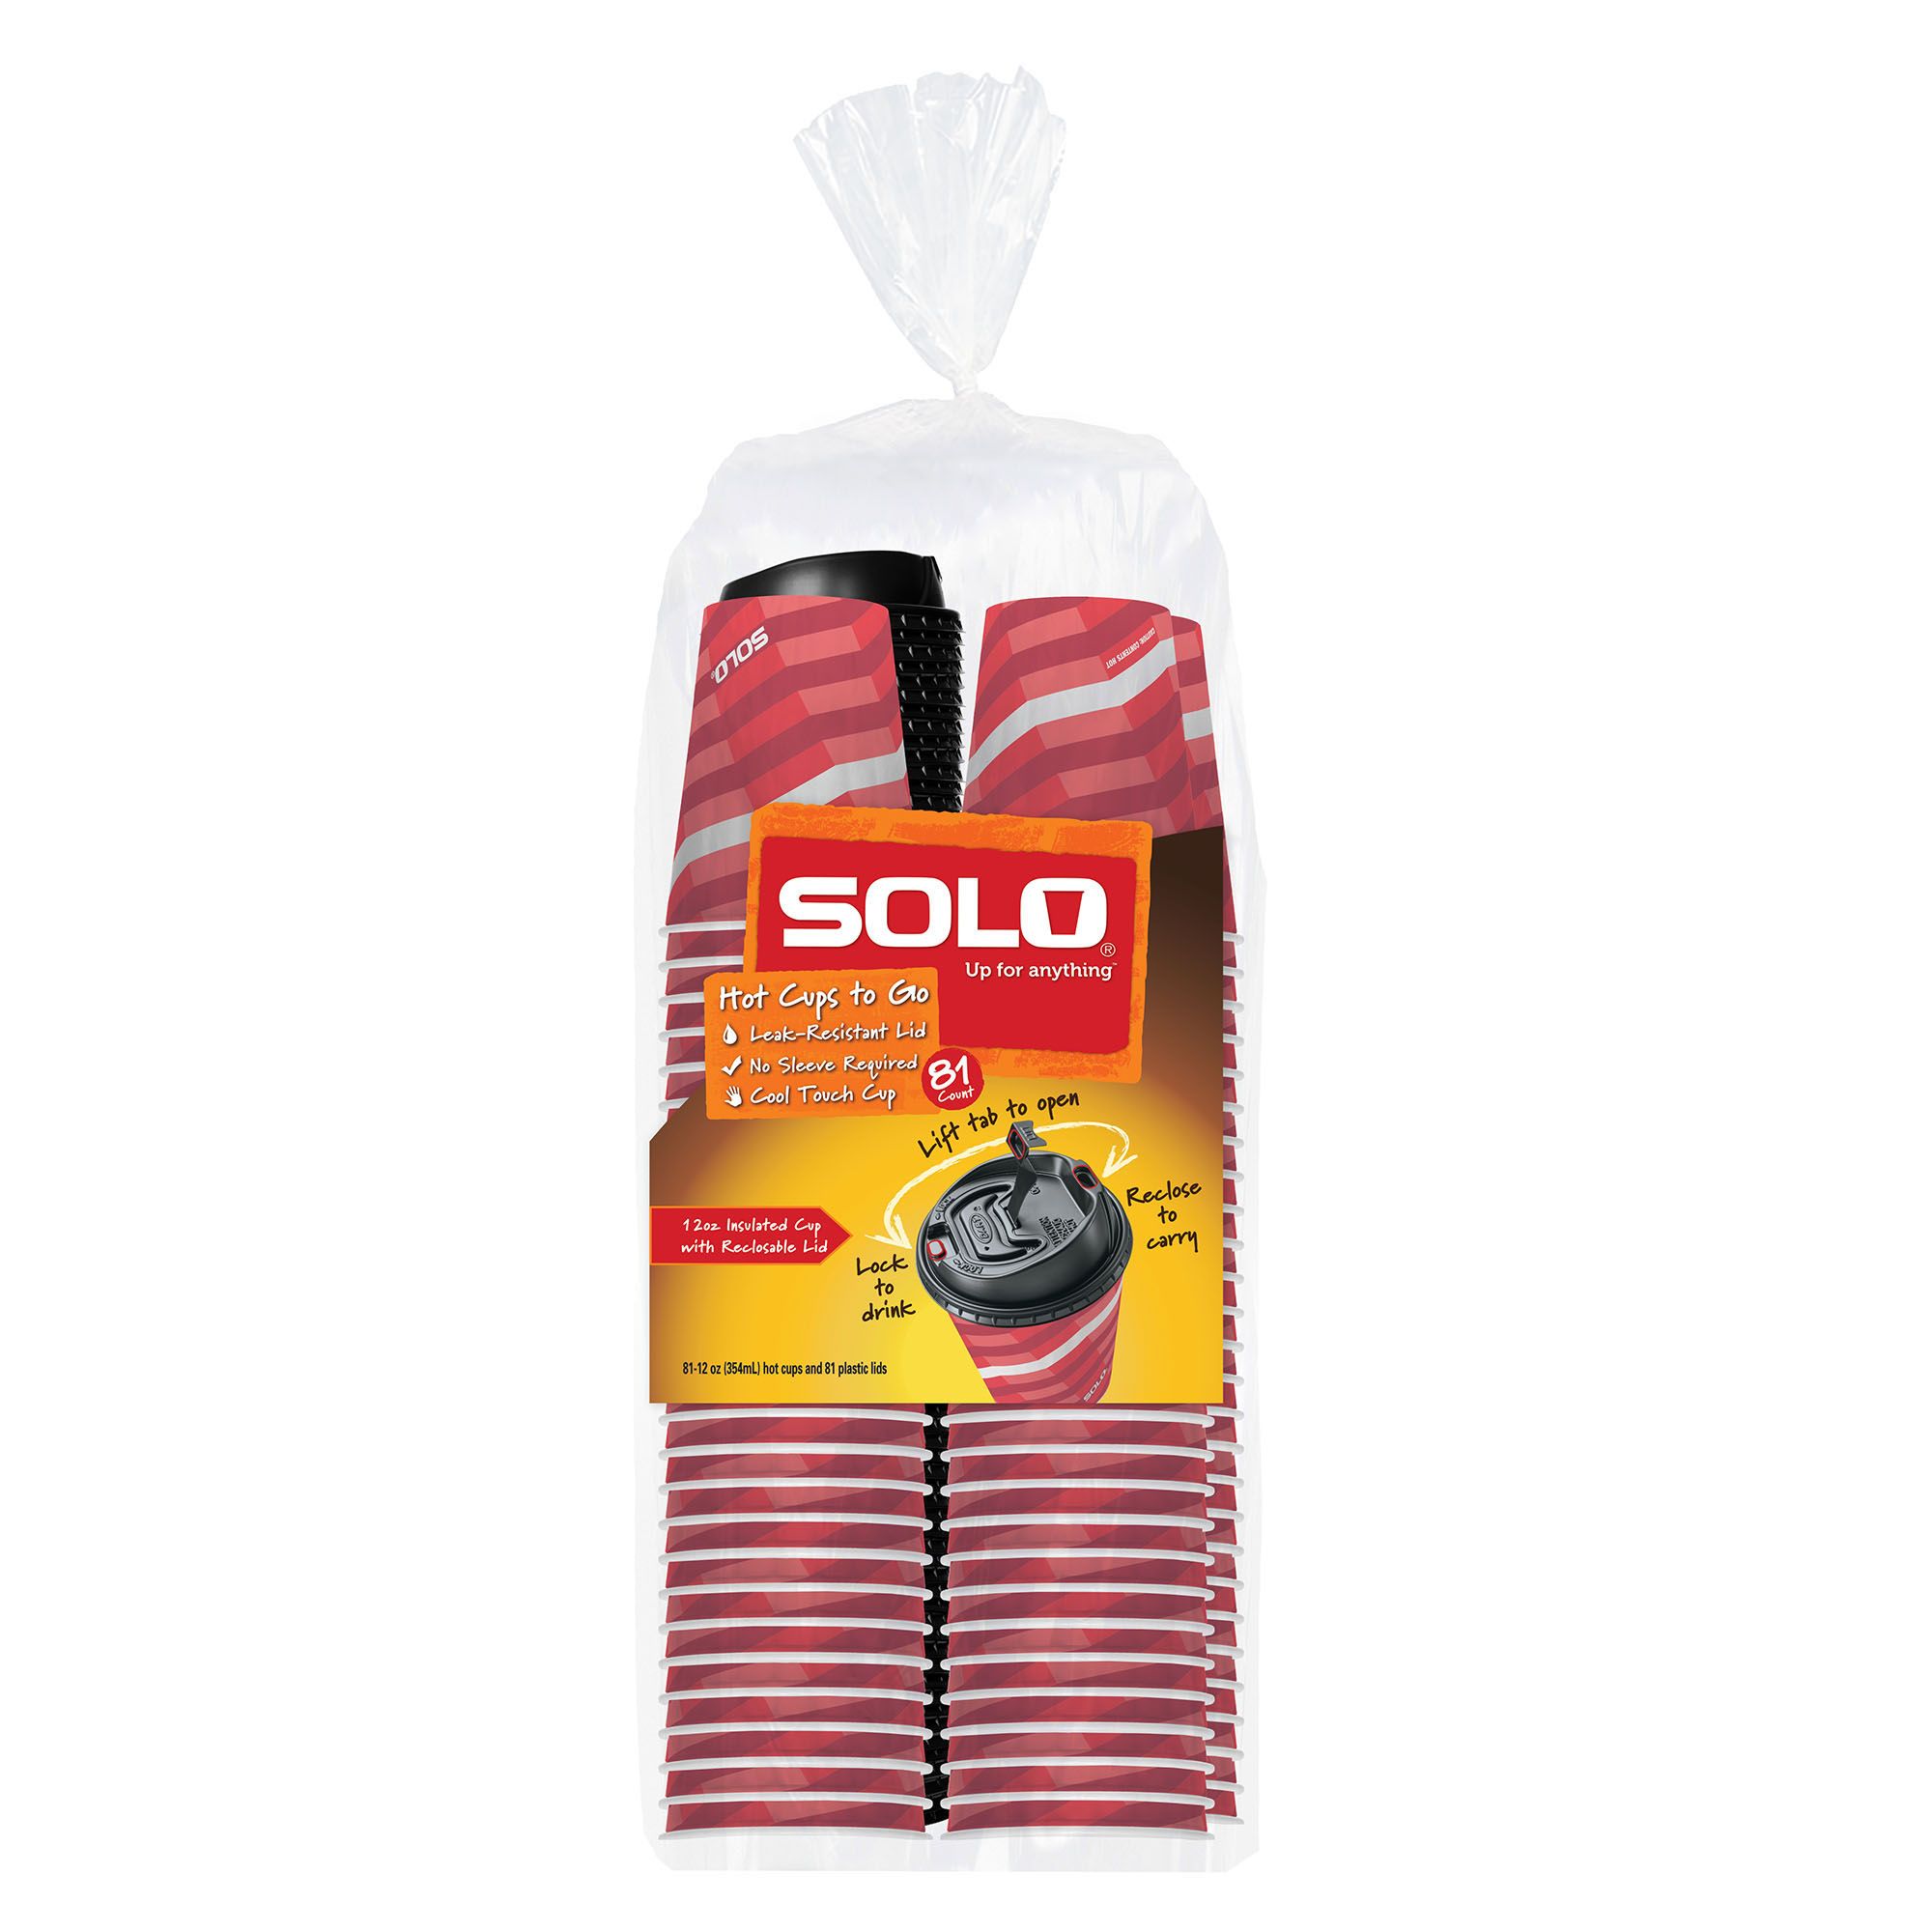 SOLO 12 oz. Hot Cups To Go, 81 ct